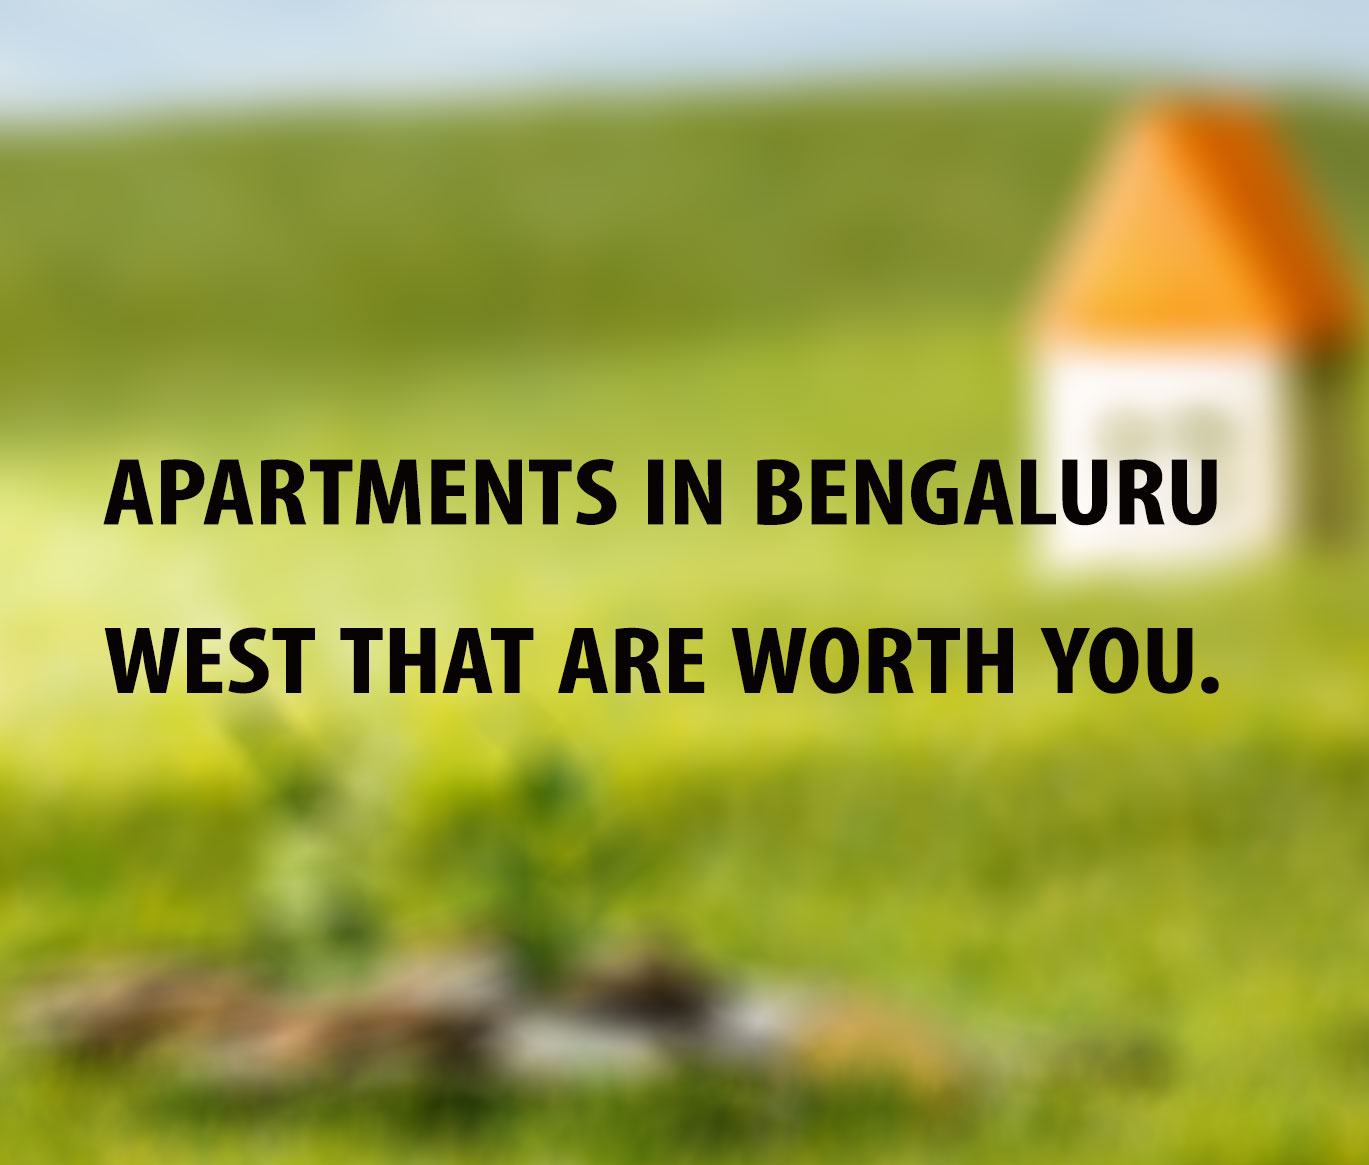 Apartments in Bengaluru West that are worth you